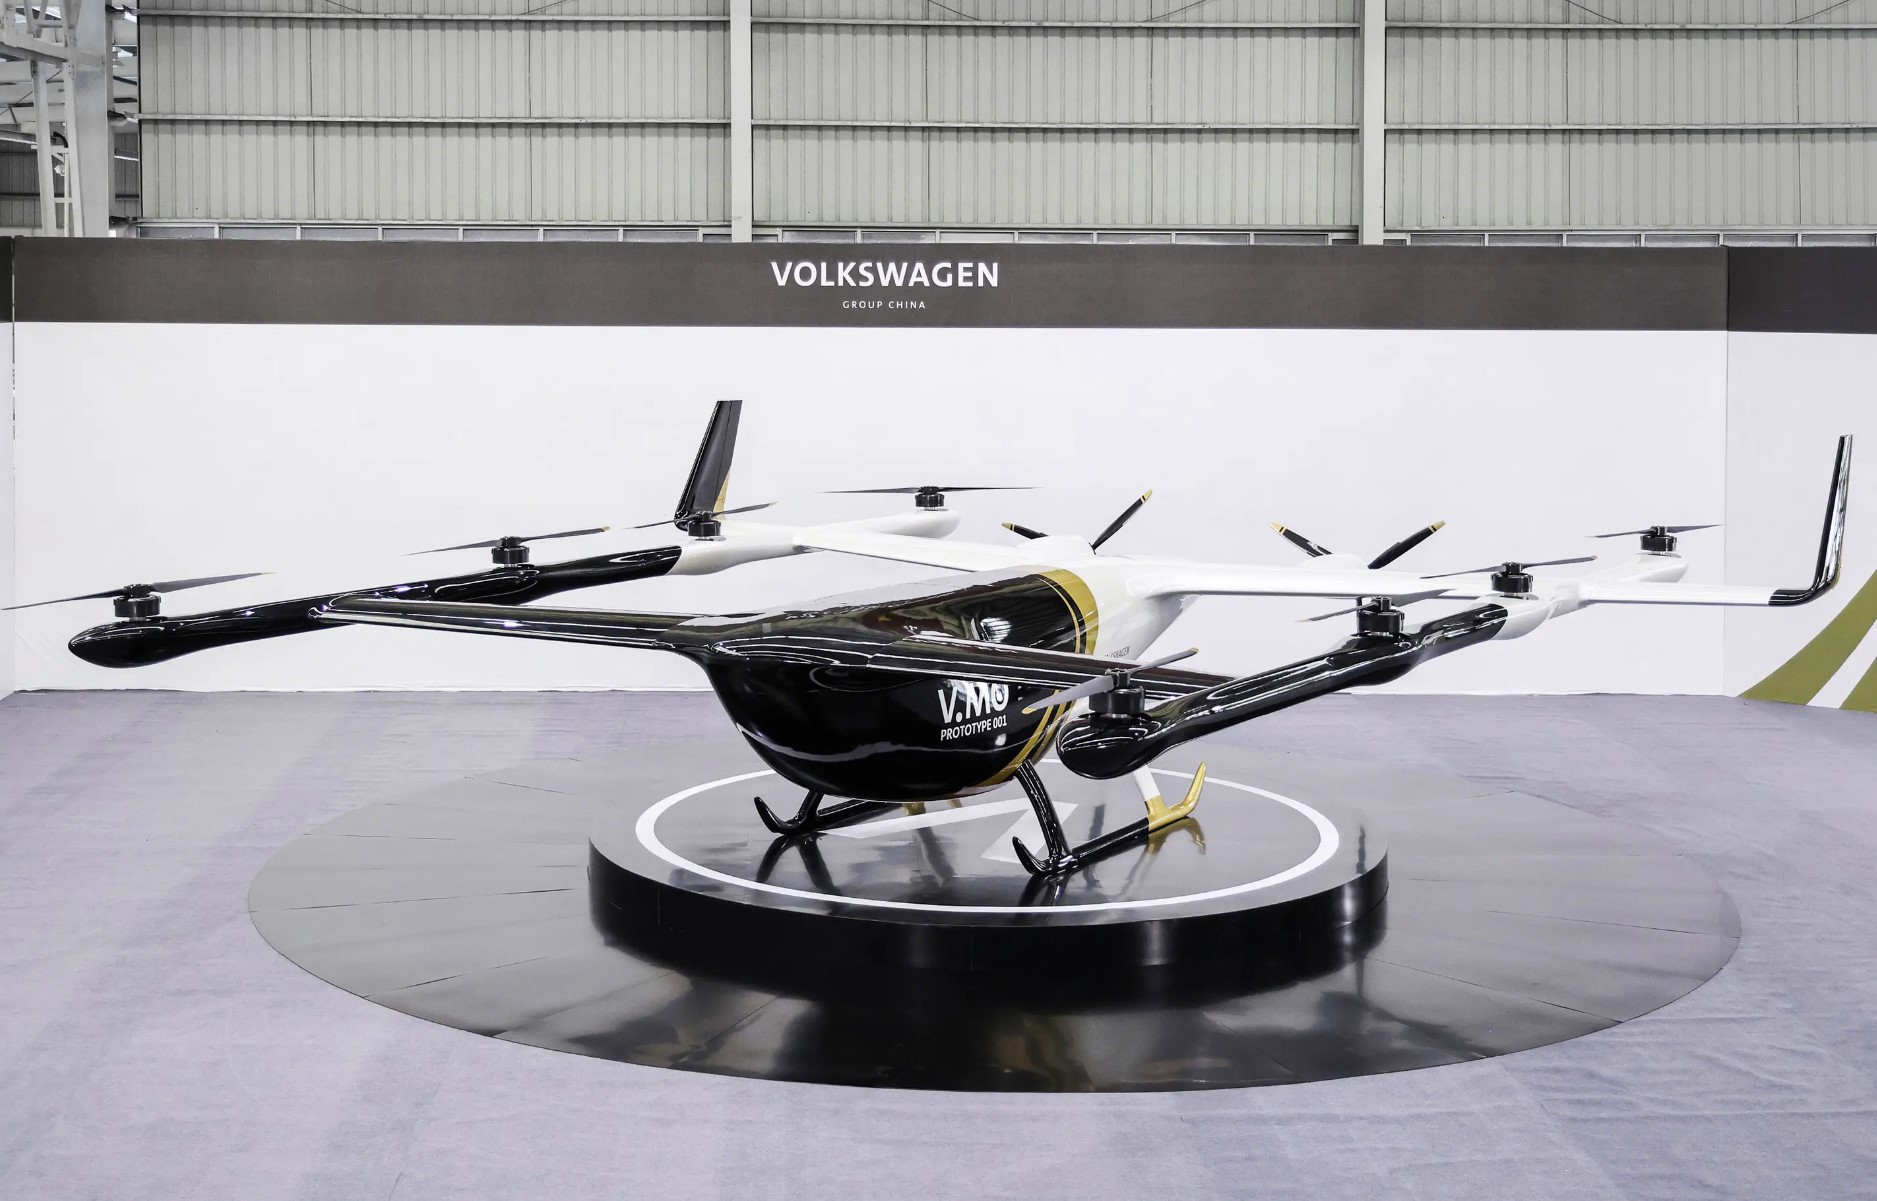 Volkswagen Group China announced its own eVTOL called "Flying Tiger" V.MO